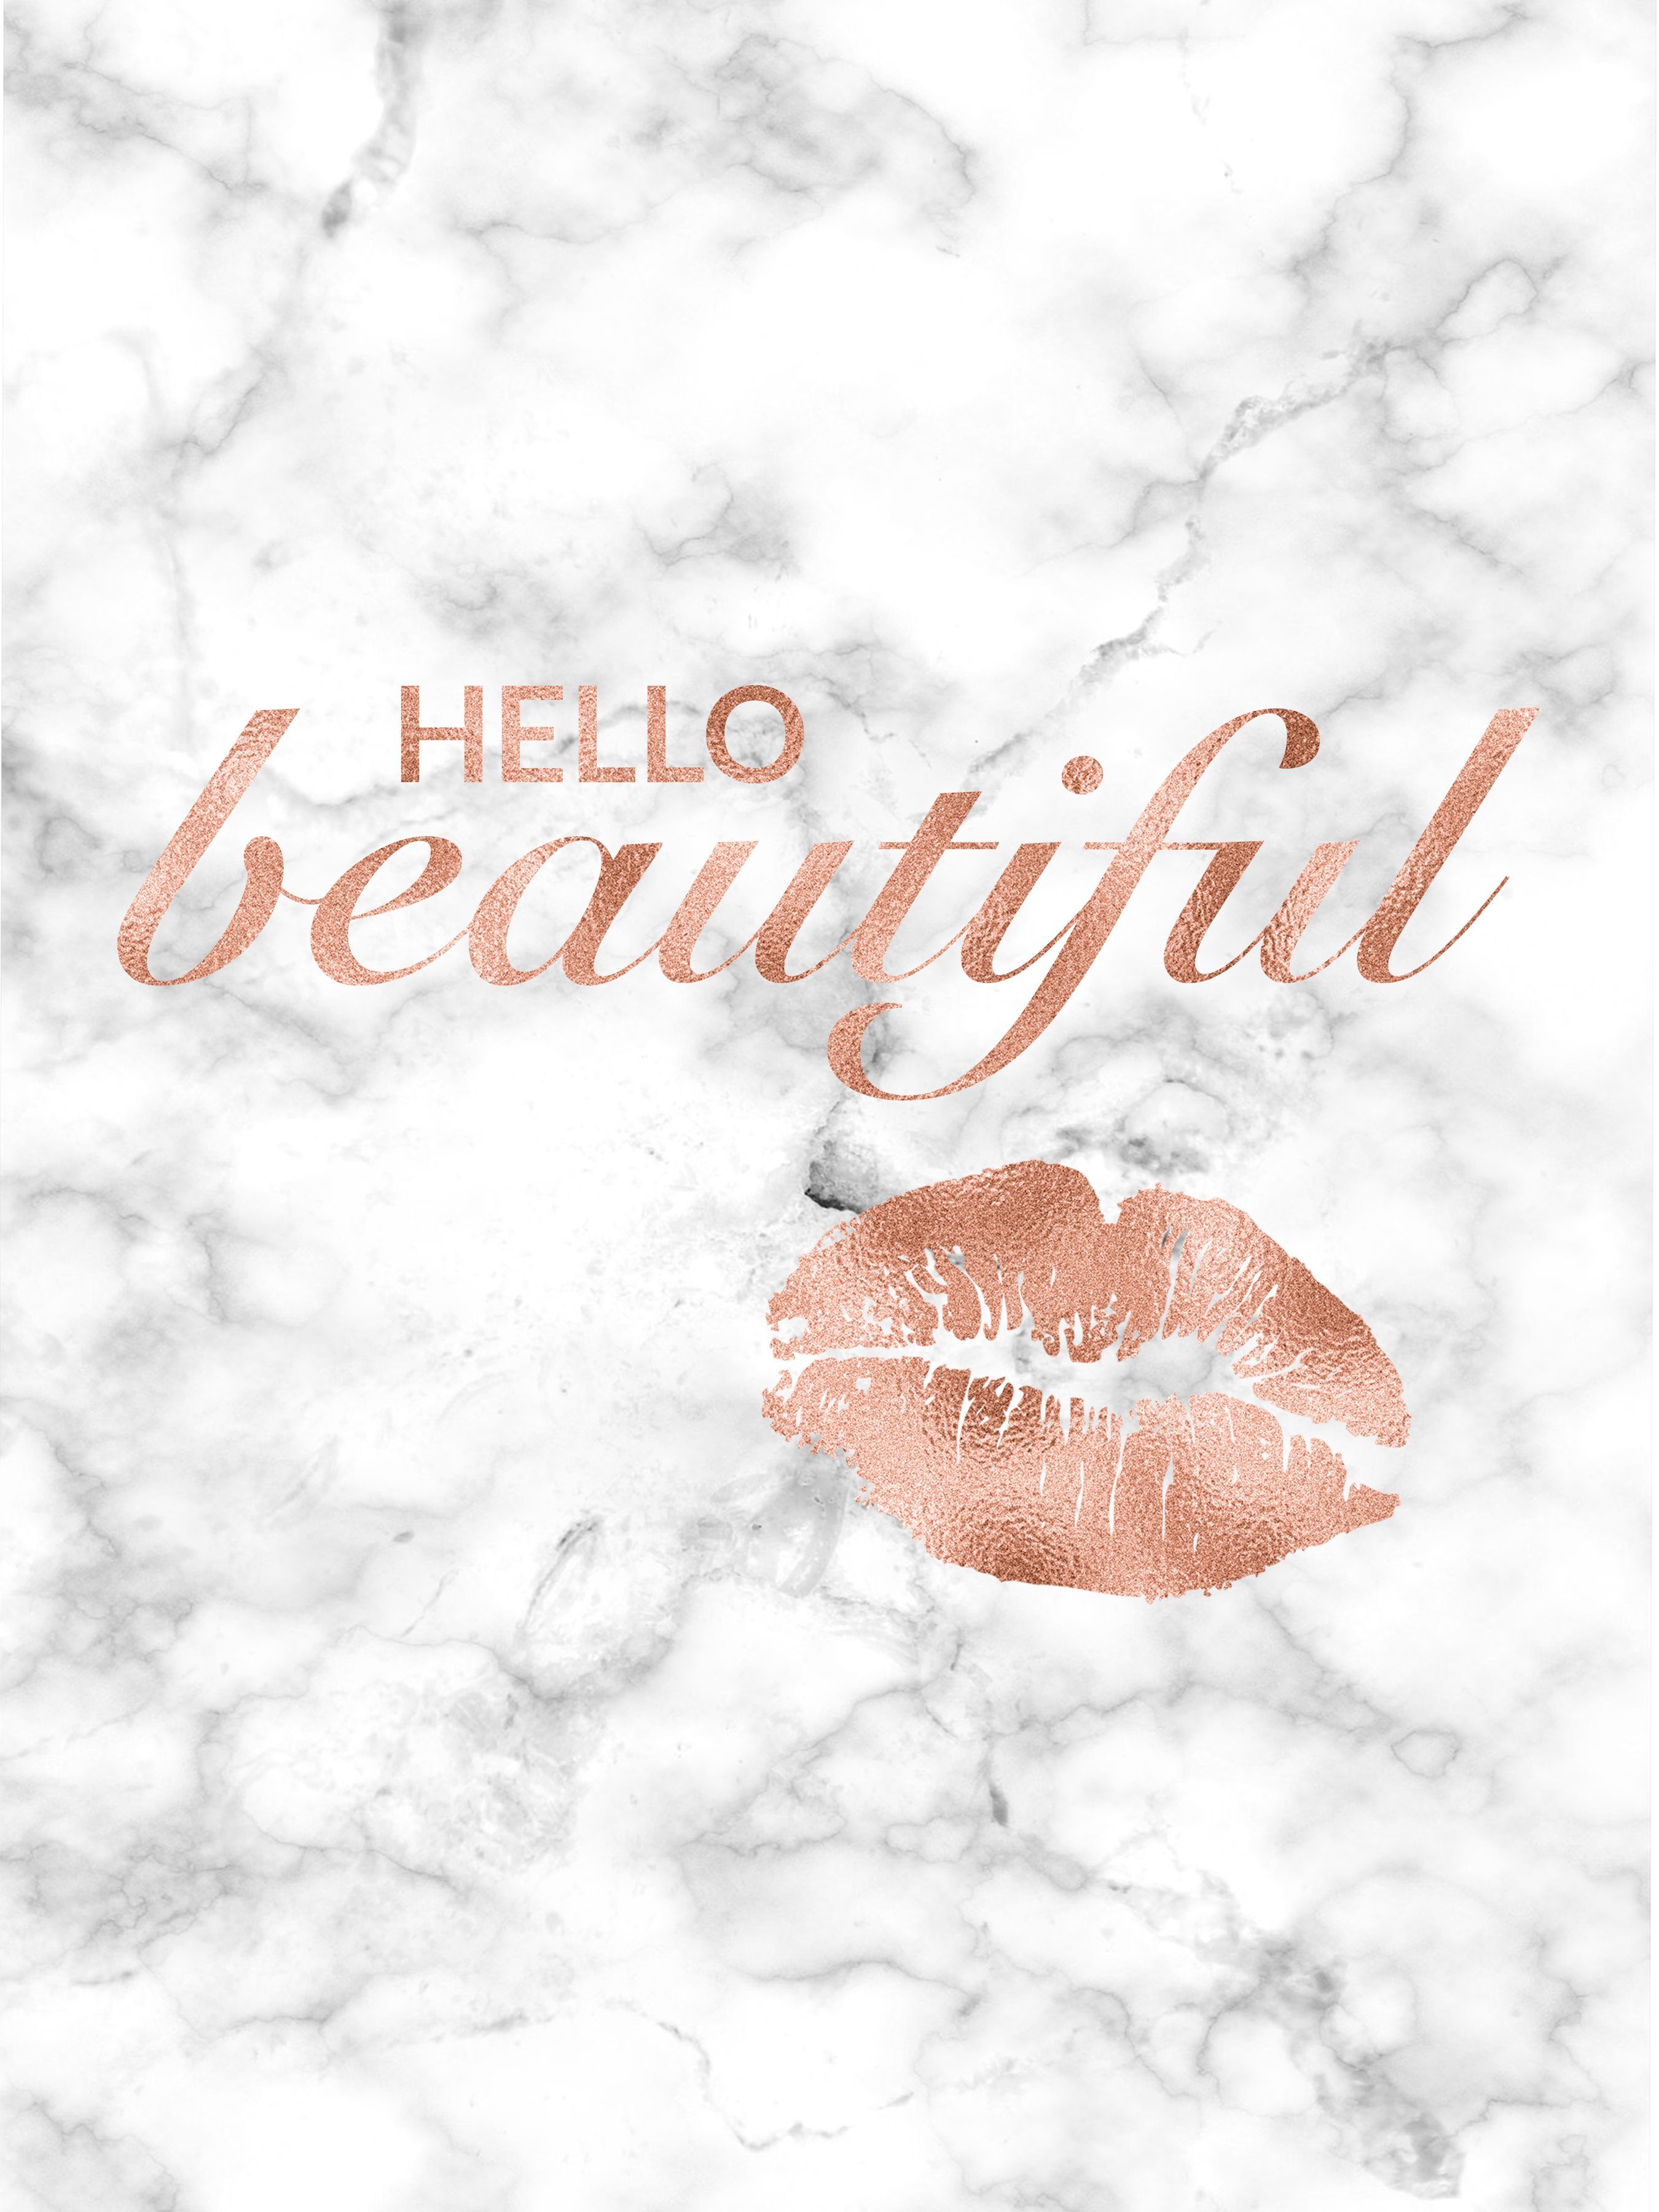 Hello Beautiful Print Inspirational Quotes Inspirational Wall Art Rose Gold And Marble Bedroom De. Rose Gold Wall Art, Rose Gold Wallpaper Iphone, Rose Gold Print